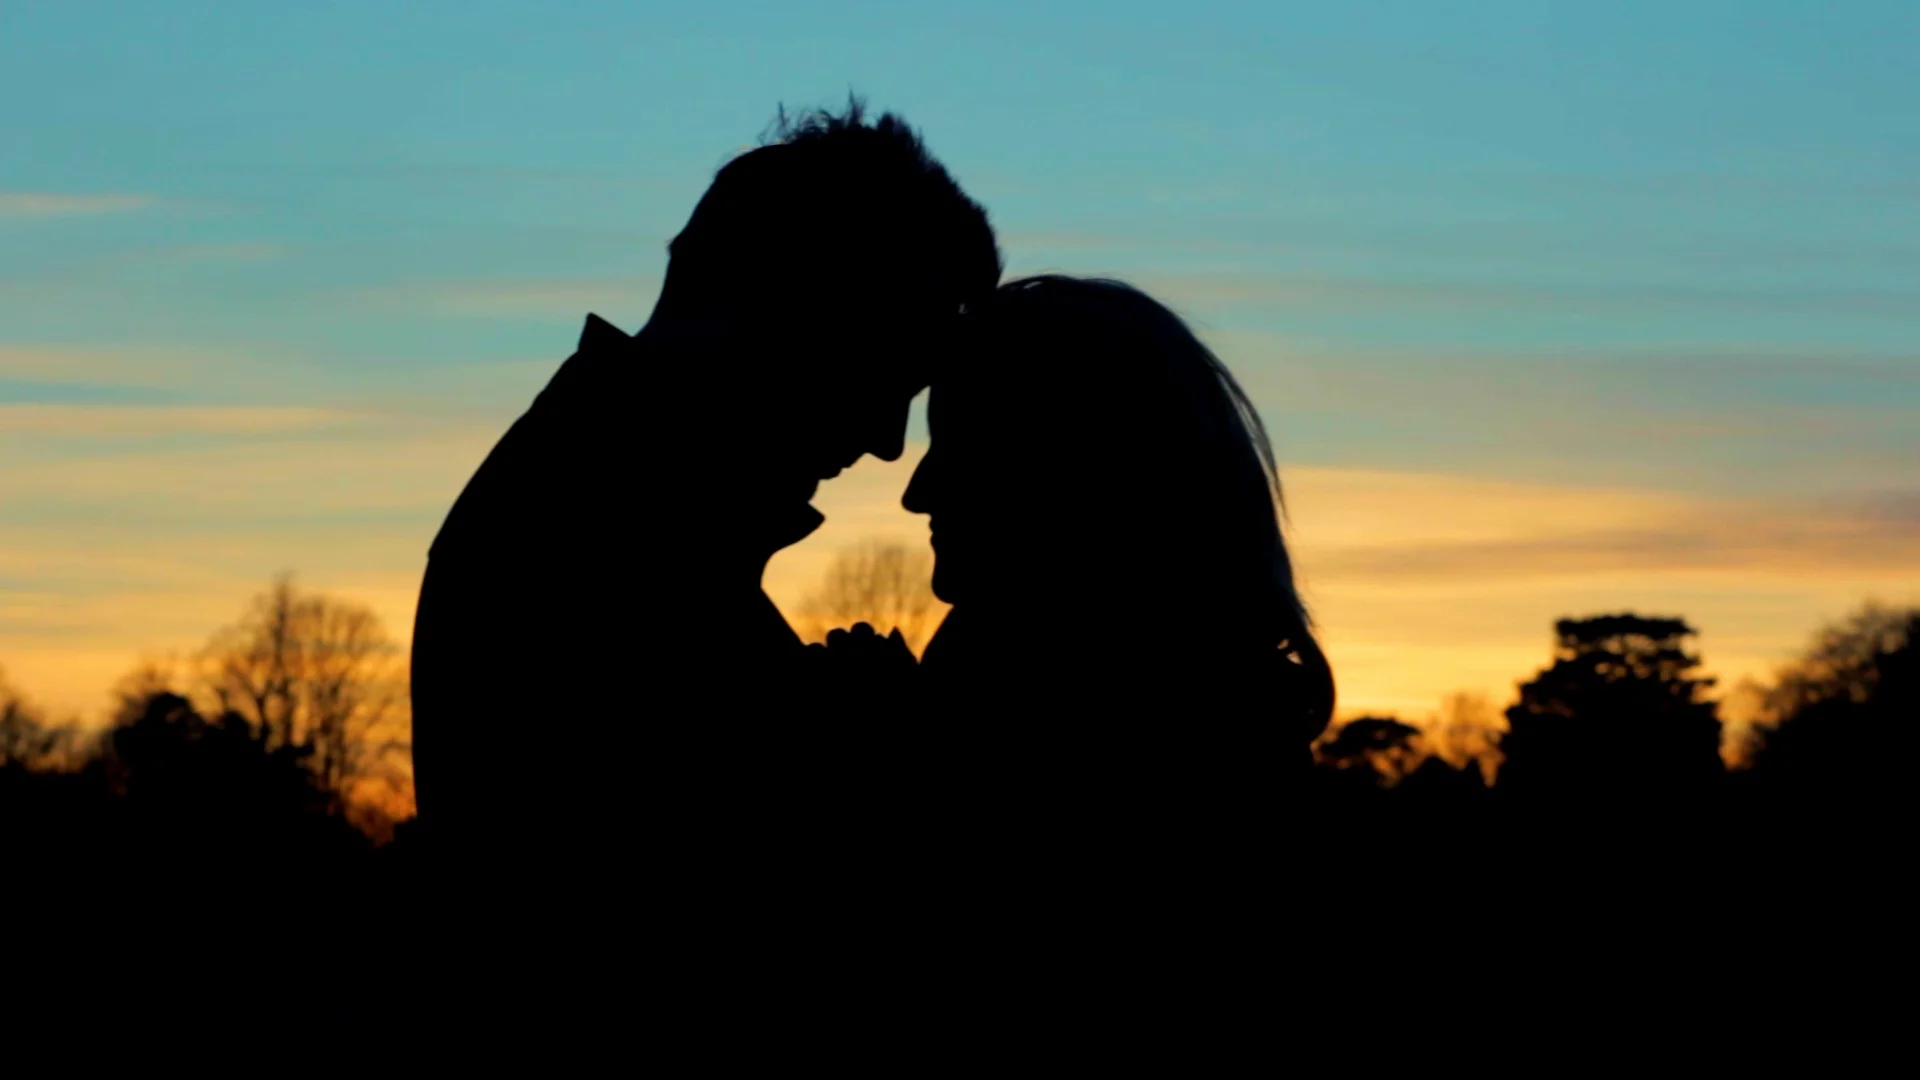 Silhouette Of Couple In Love Silhouette During Sunset Stock Photo, Picture  and Royalty Free Image. Image 156954590.